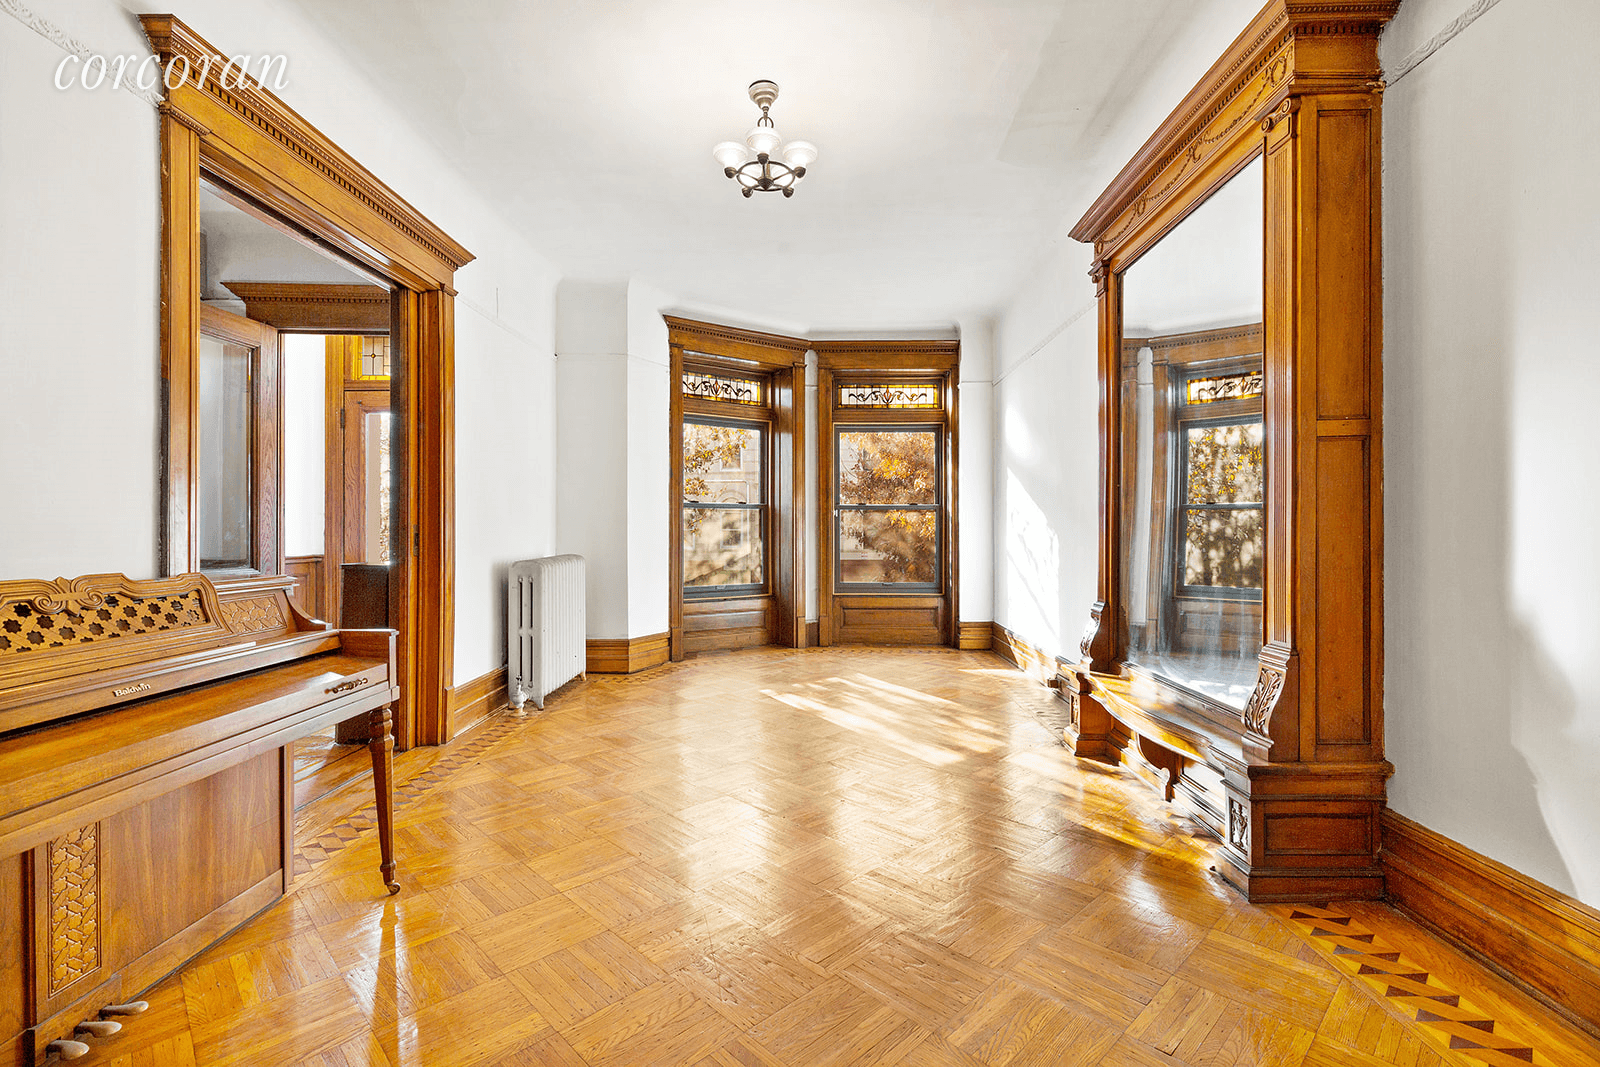 Welcome to 21 Hawthorne Street, a massive two family limestone perfectly located in prime Prospect Lefferts Gardens a few blocks from Prospect Park.